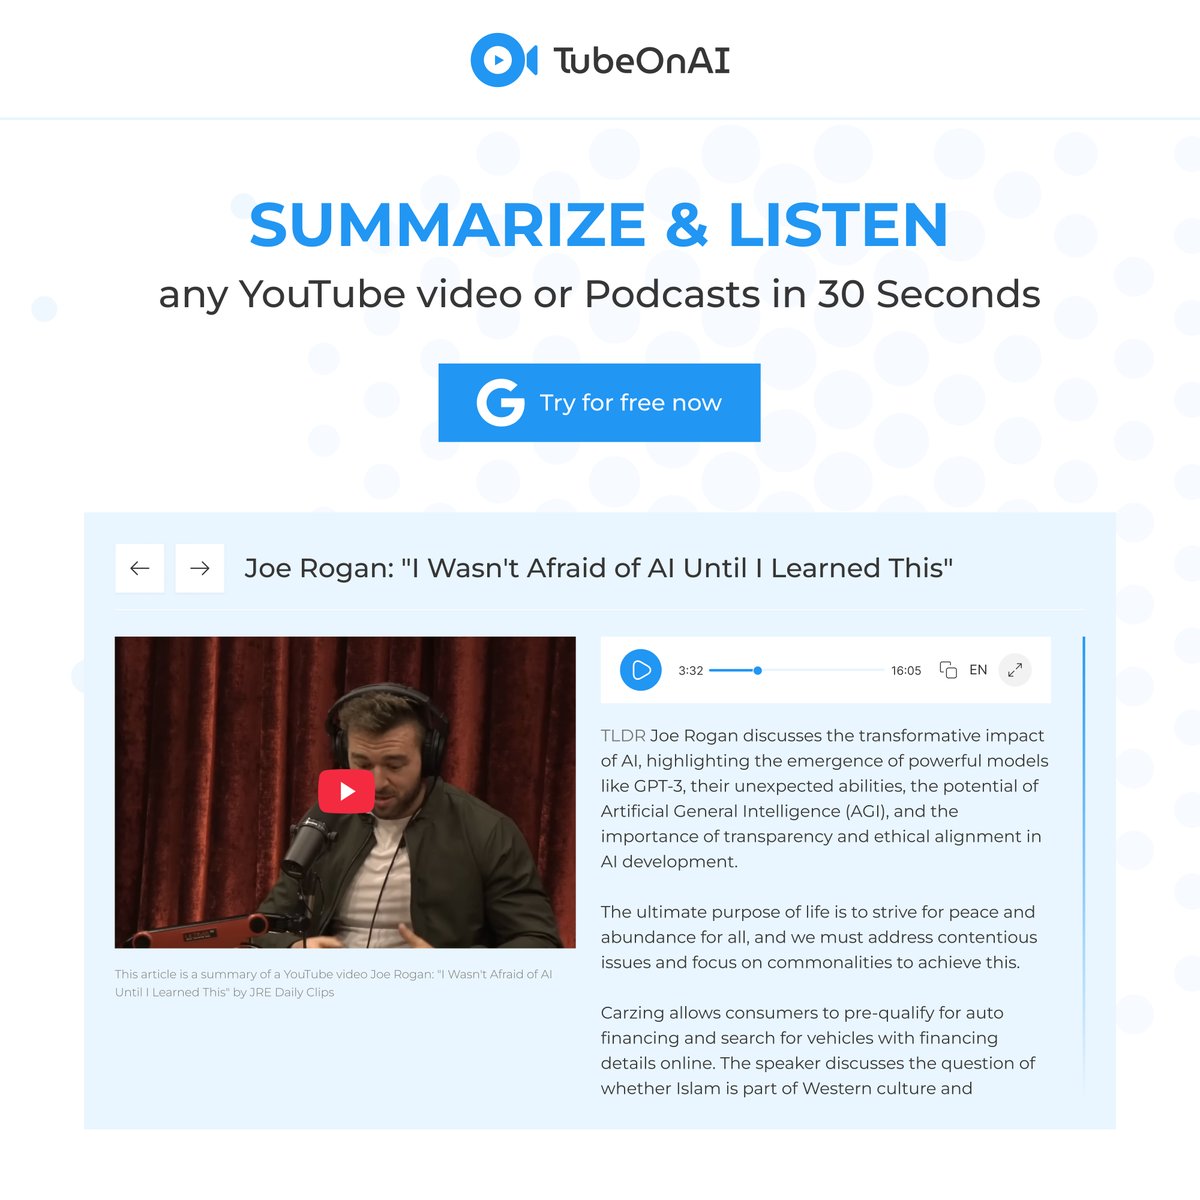 TubeOnAI: Instant AI Audio Summaries of YouTube Videos! Simplify content consumption with TubeOnAI. Get fast video summaries, natural audio playback, curated notifications, and mobile apps. Try for Free! #tubeonai #summarize #listen